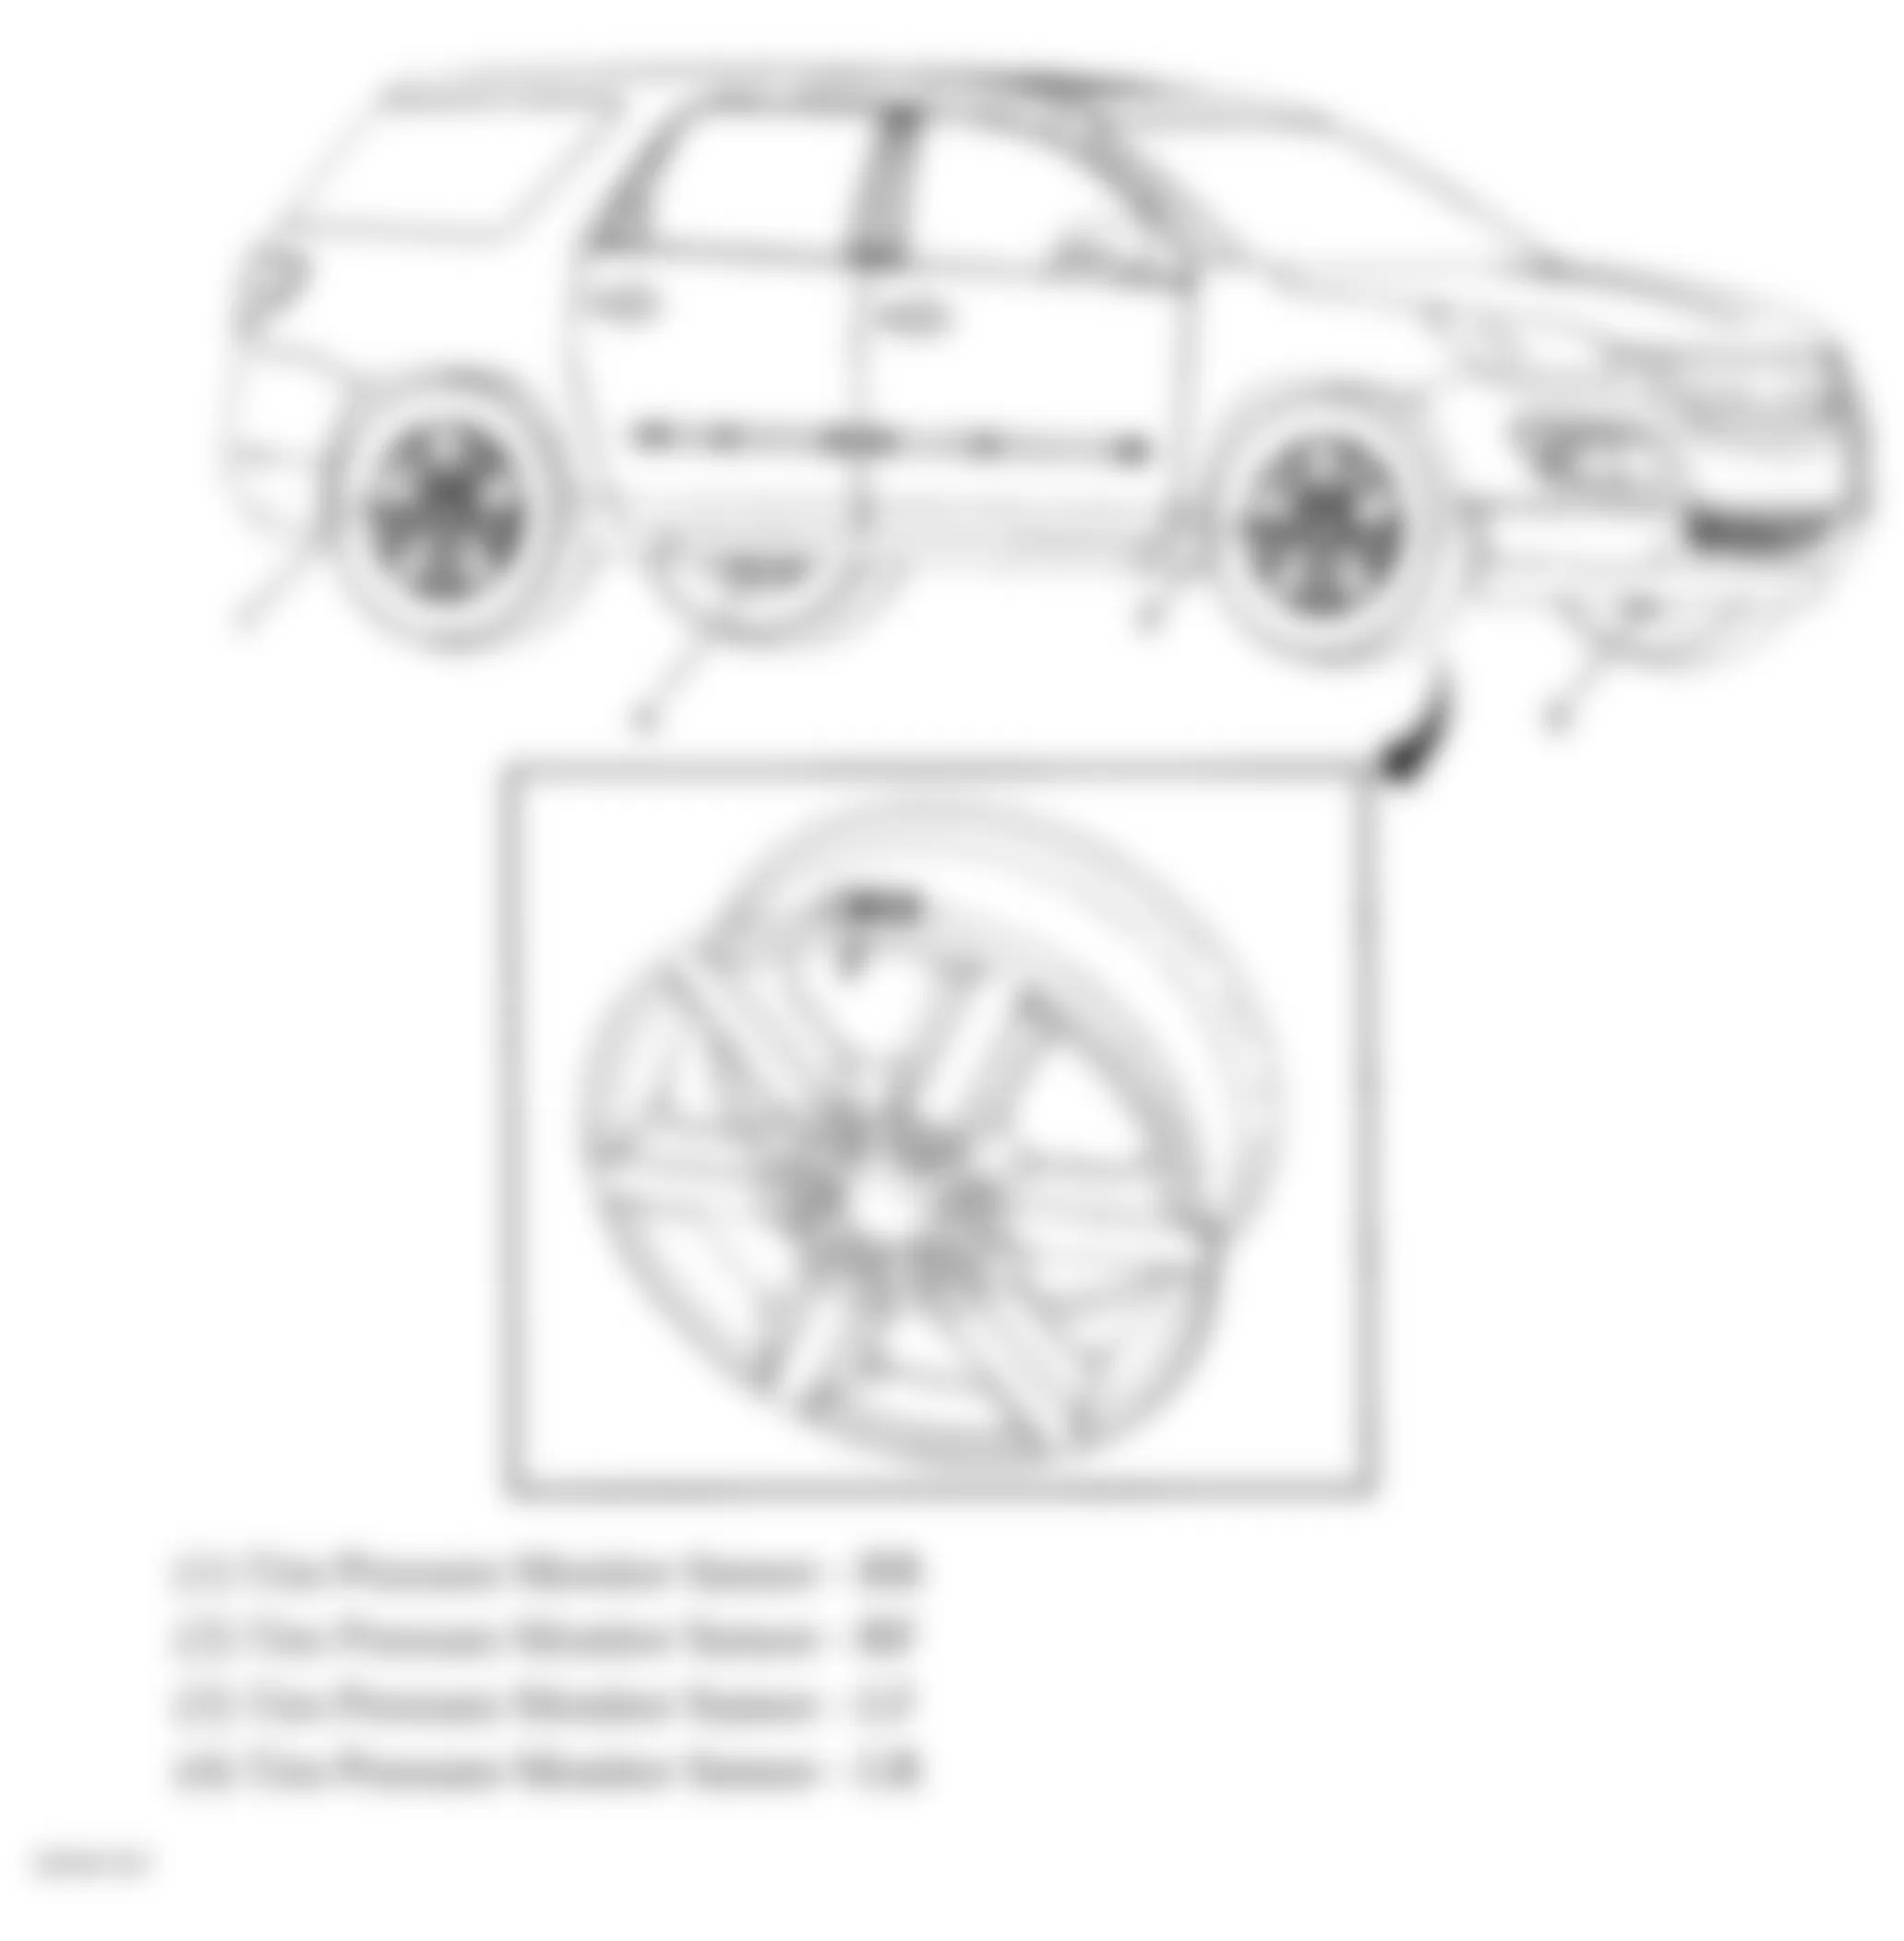 GMC Acadia SLT 2007 - Component Locations -  Vehicle Tire Overview